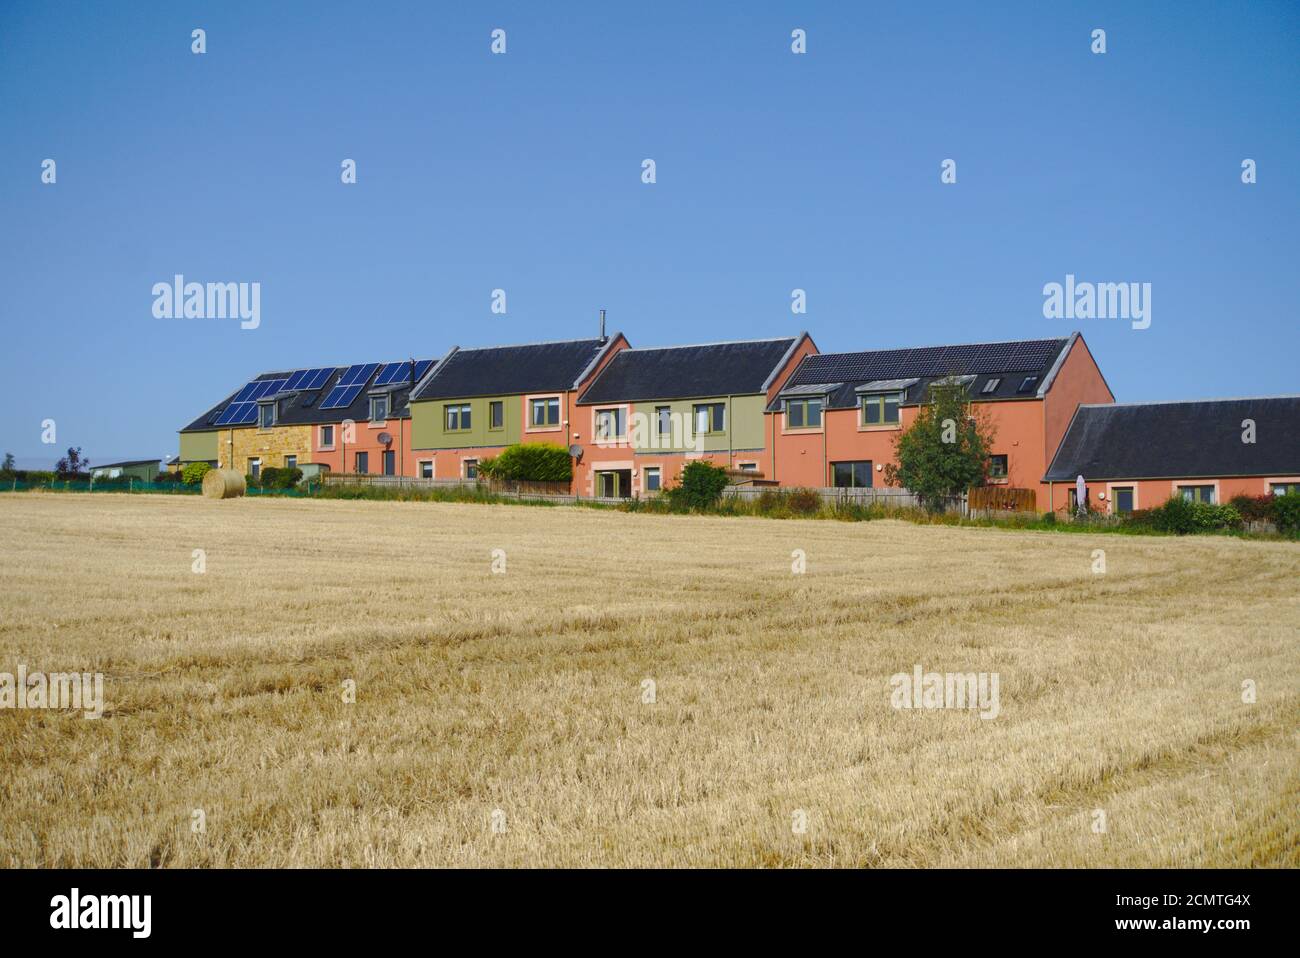 Multi coloured houses, some with solar panels, seen across field in Bolton Steading, Bolton, East Lothian, Scotland, UK. Stock Photo